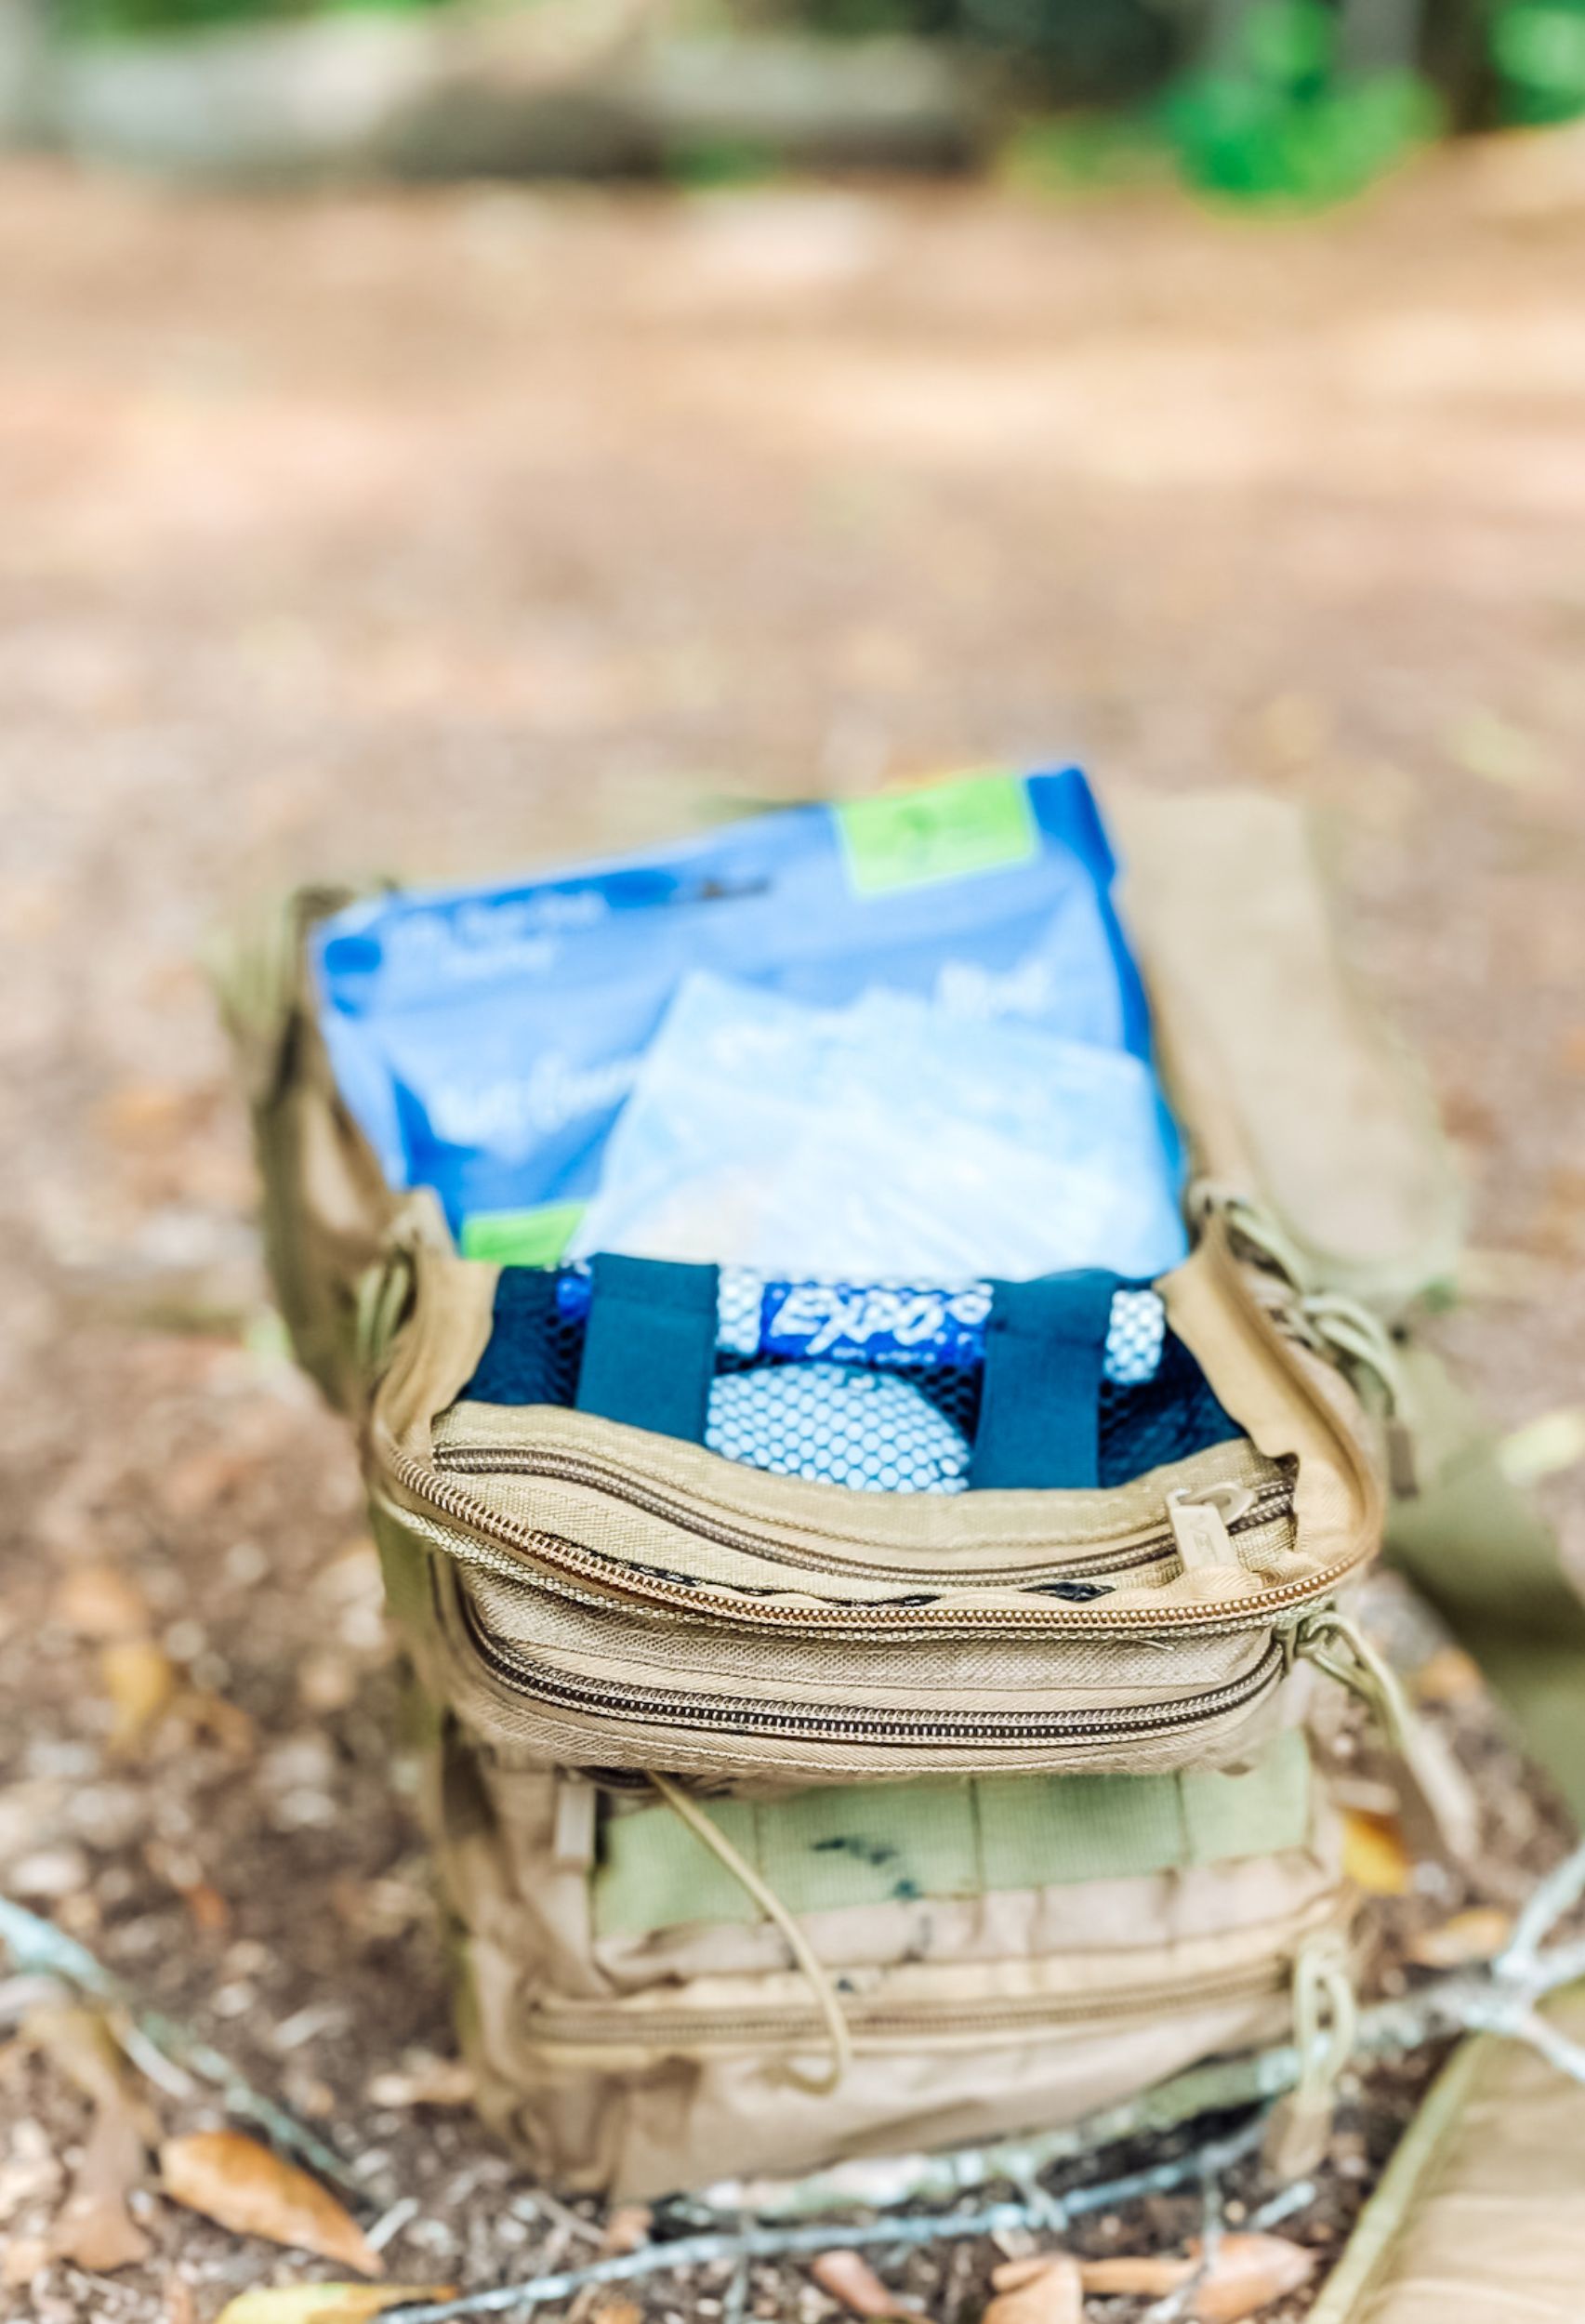 Remember to Bring the RightOnTrek Meals When Backpacking